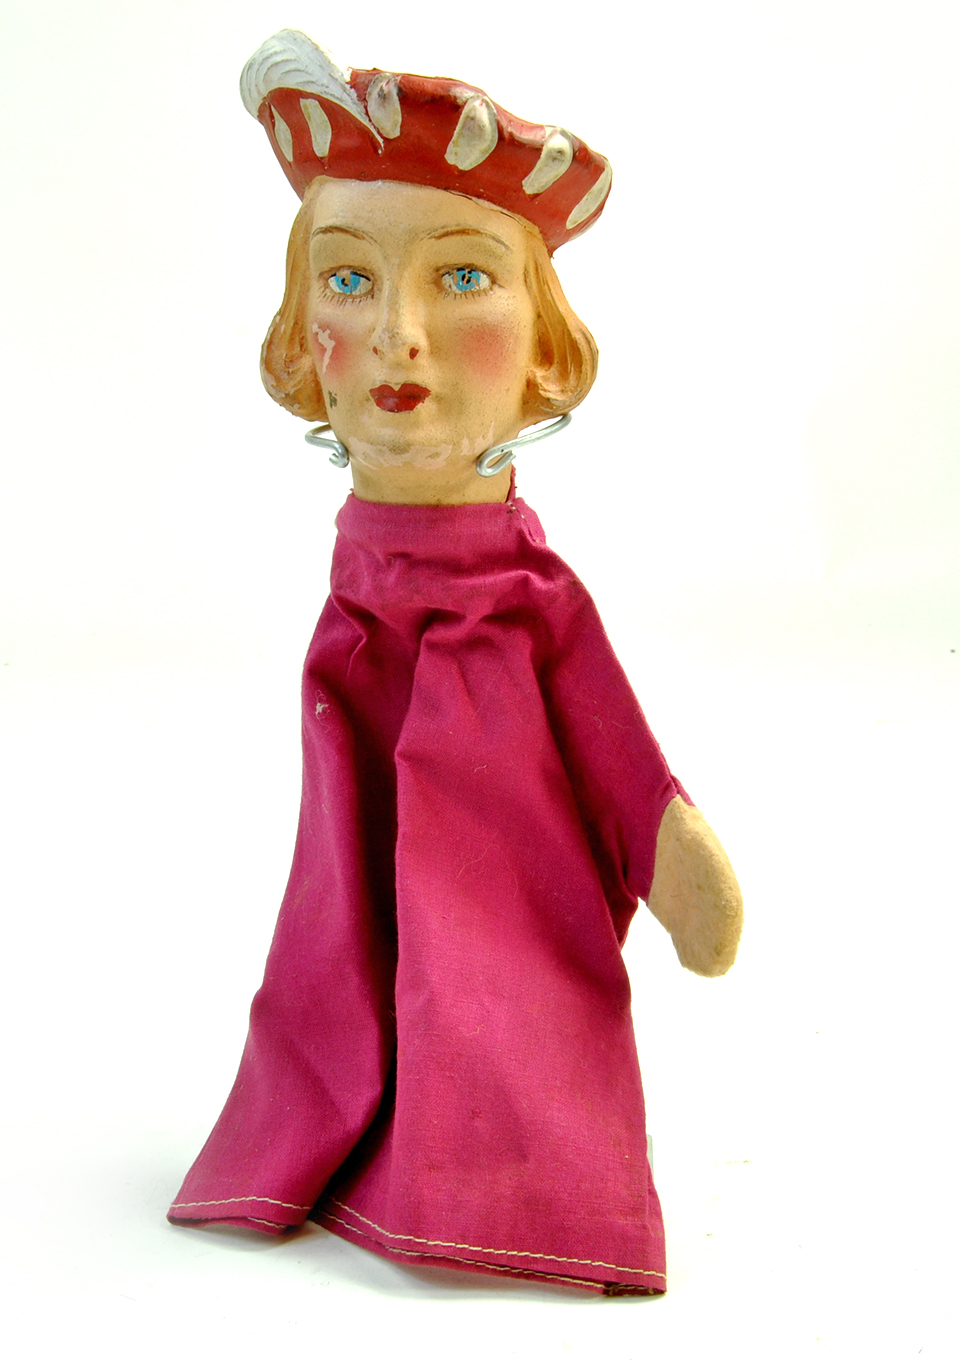 A vintage rubber-faced hand puppet. Generally fair to good. Note: We are happy to provide additional